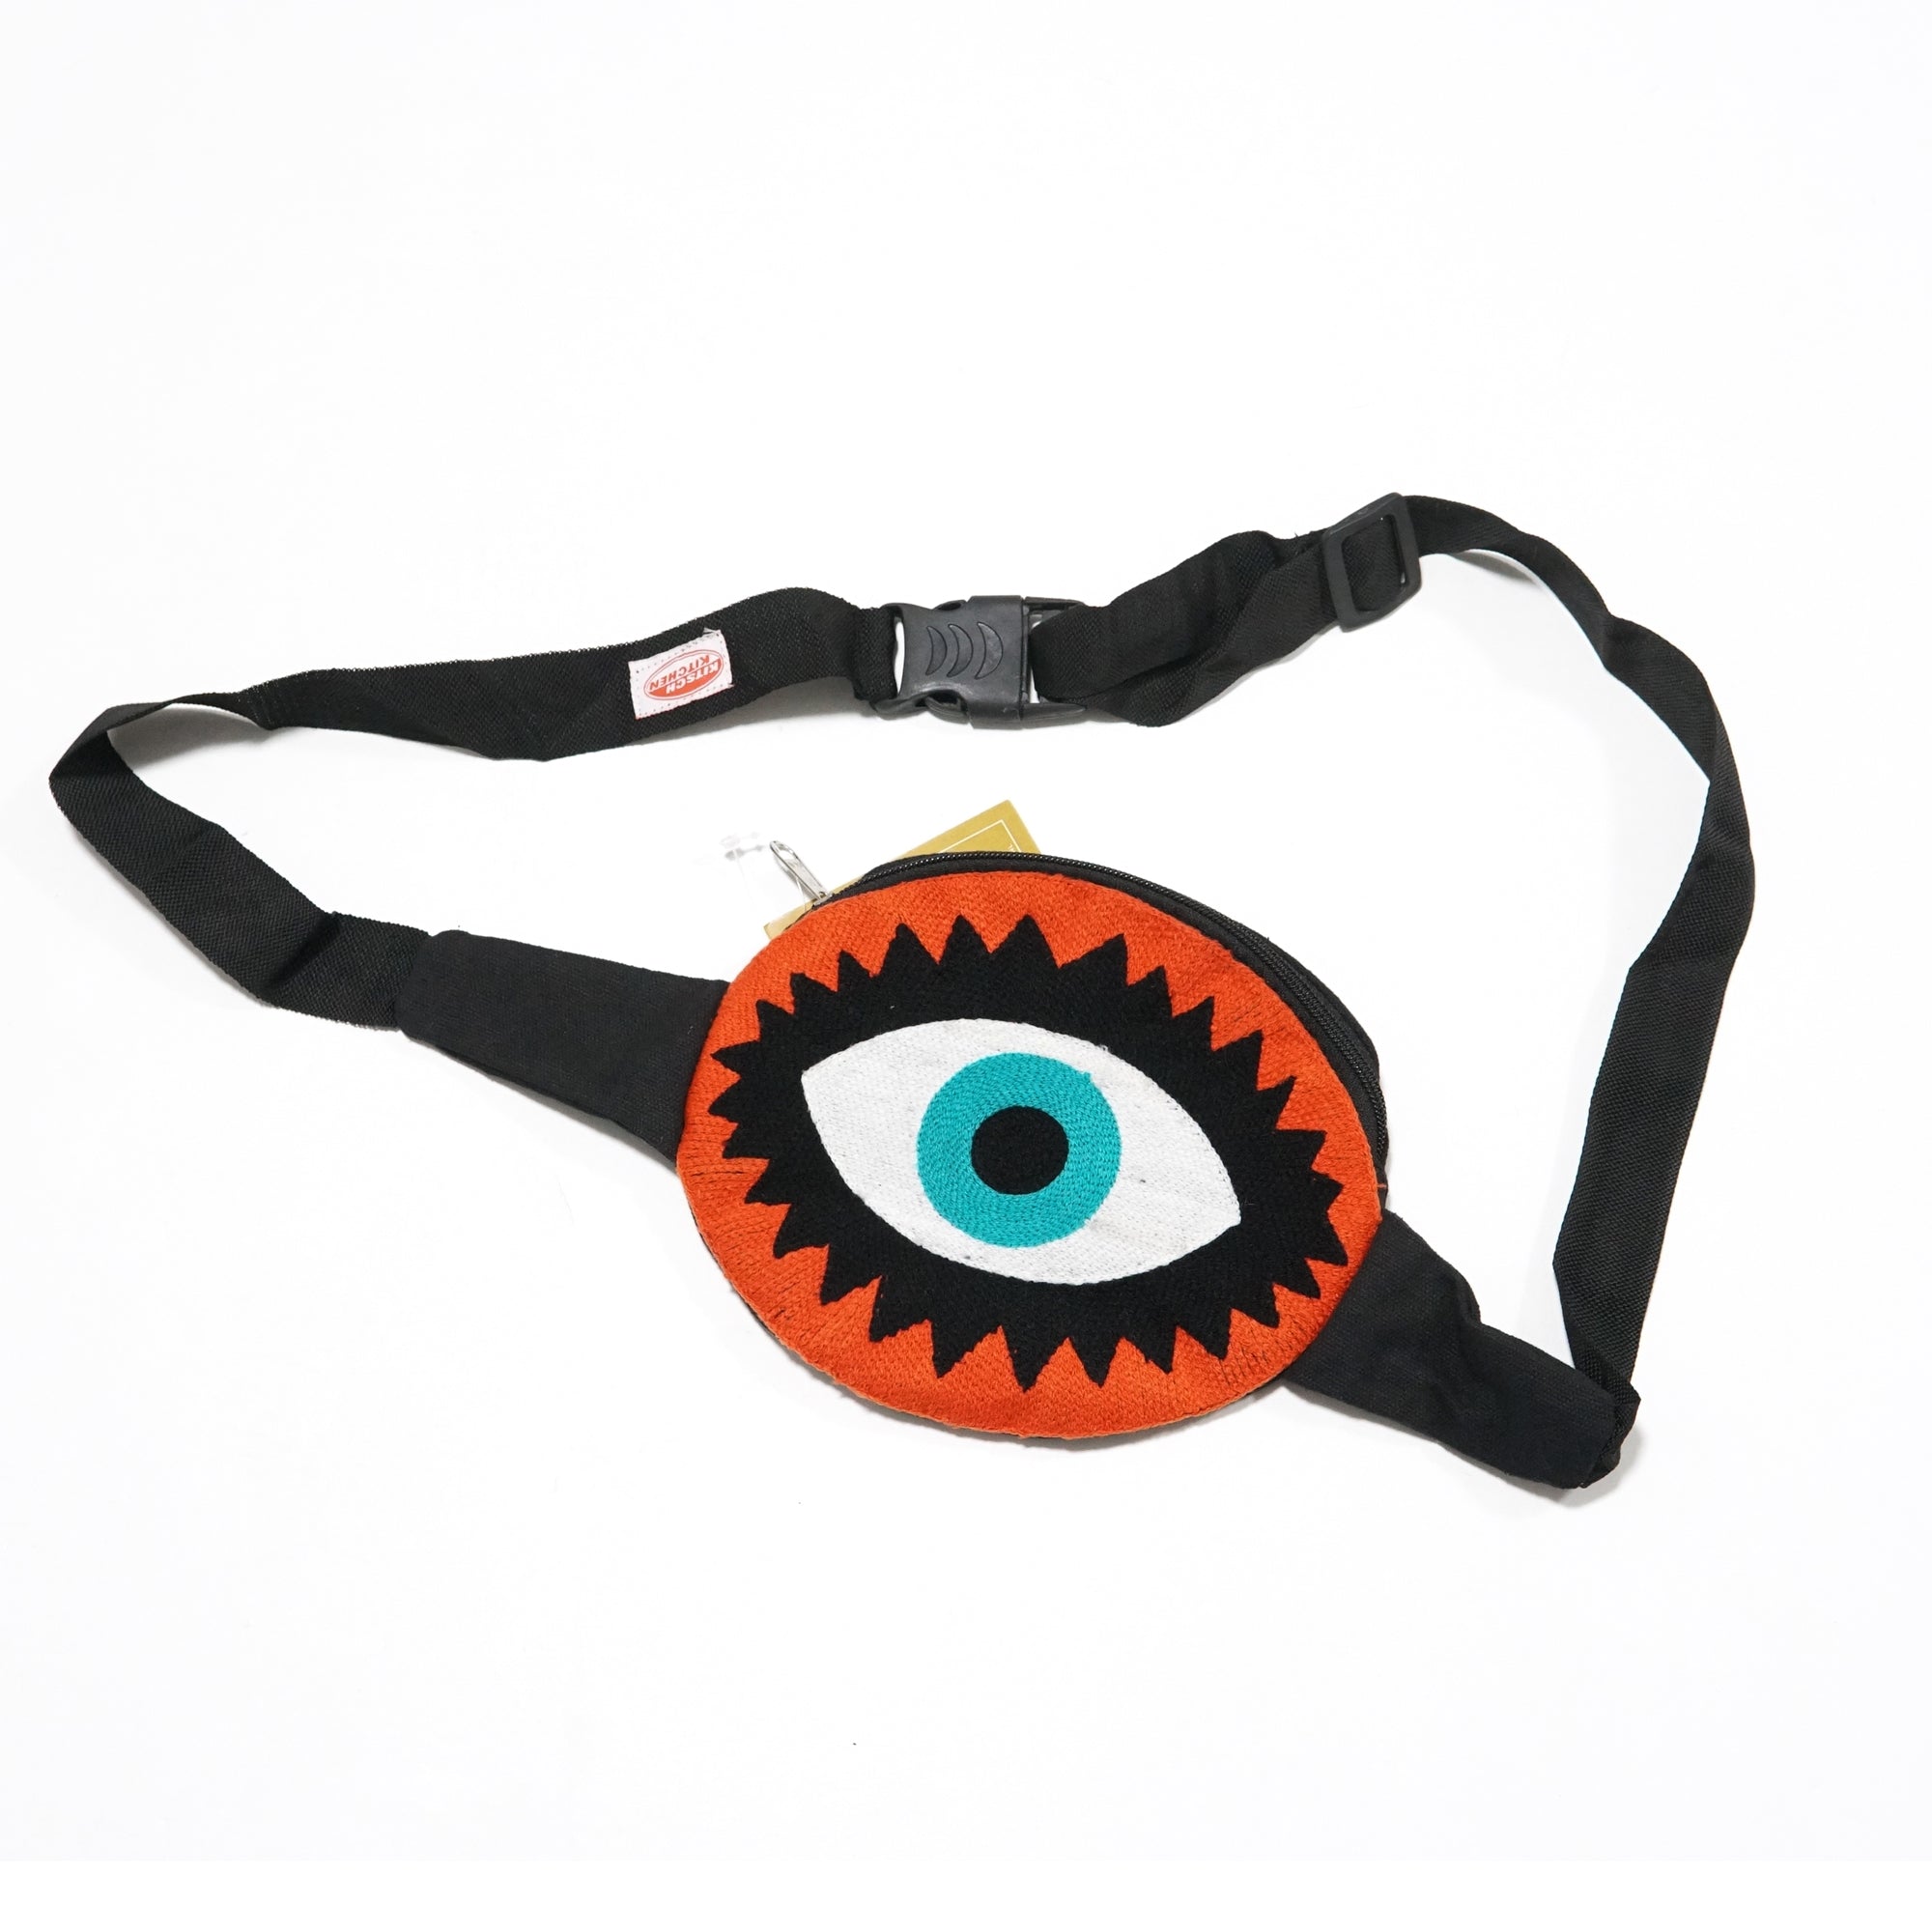 No:AC209 | Name:Fanny Pack Eye | Color: embroidere【KITSCH KITCHEN_キッチュキッチン】【ネコポス選択可能】